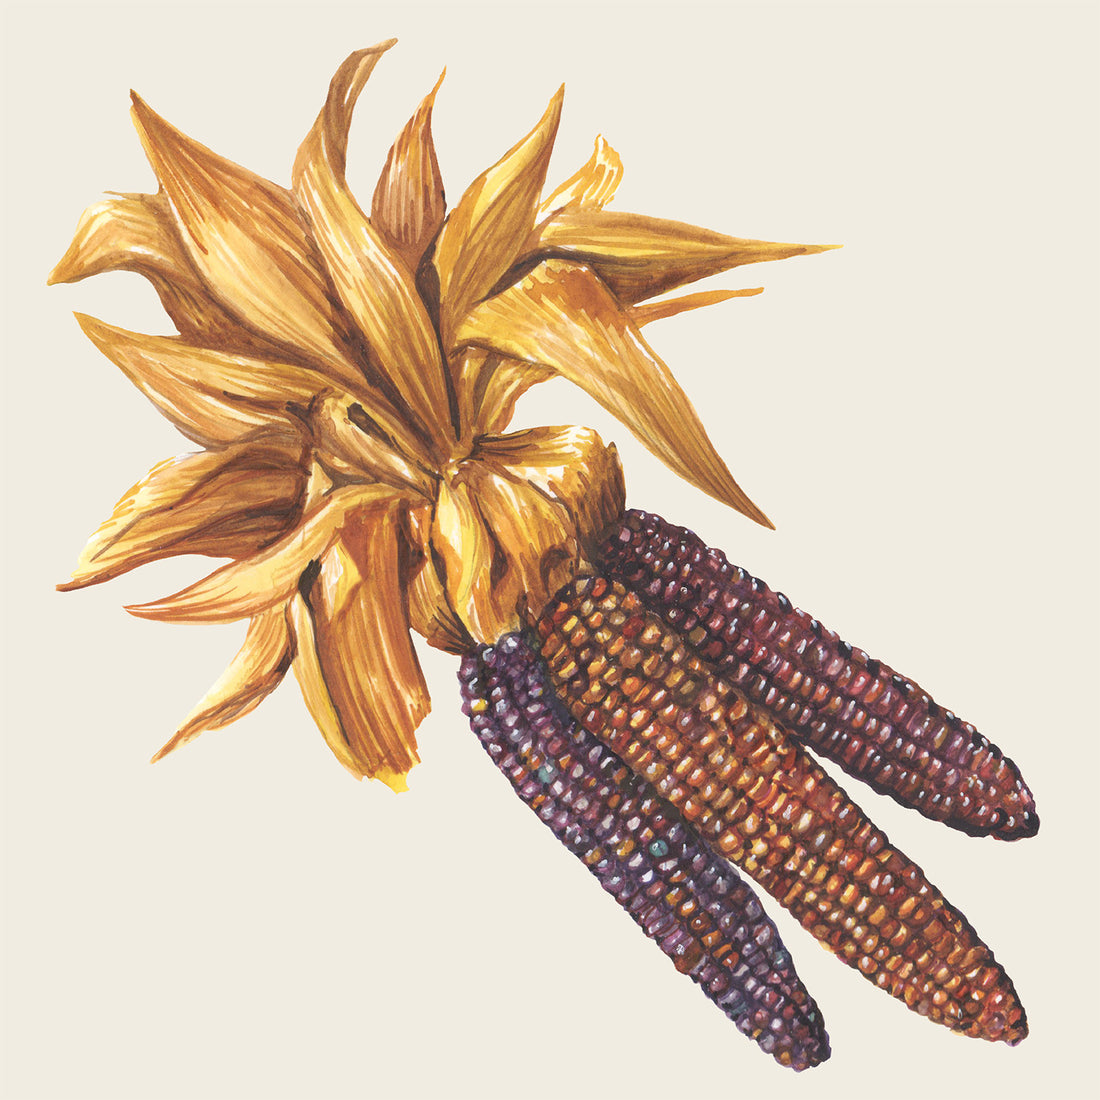 A square cocktail napkin featuring an illustrated bundle of colorful maize cobs, gathered by their yellow husks, on a white background.